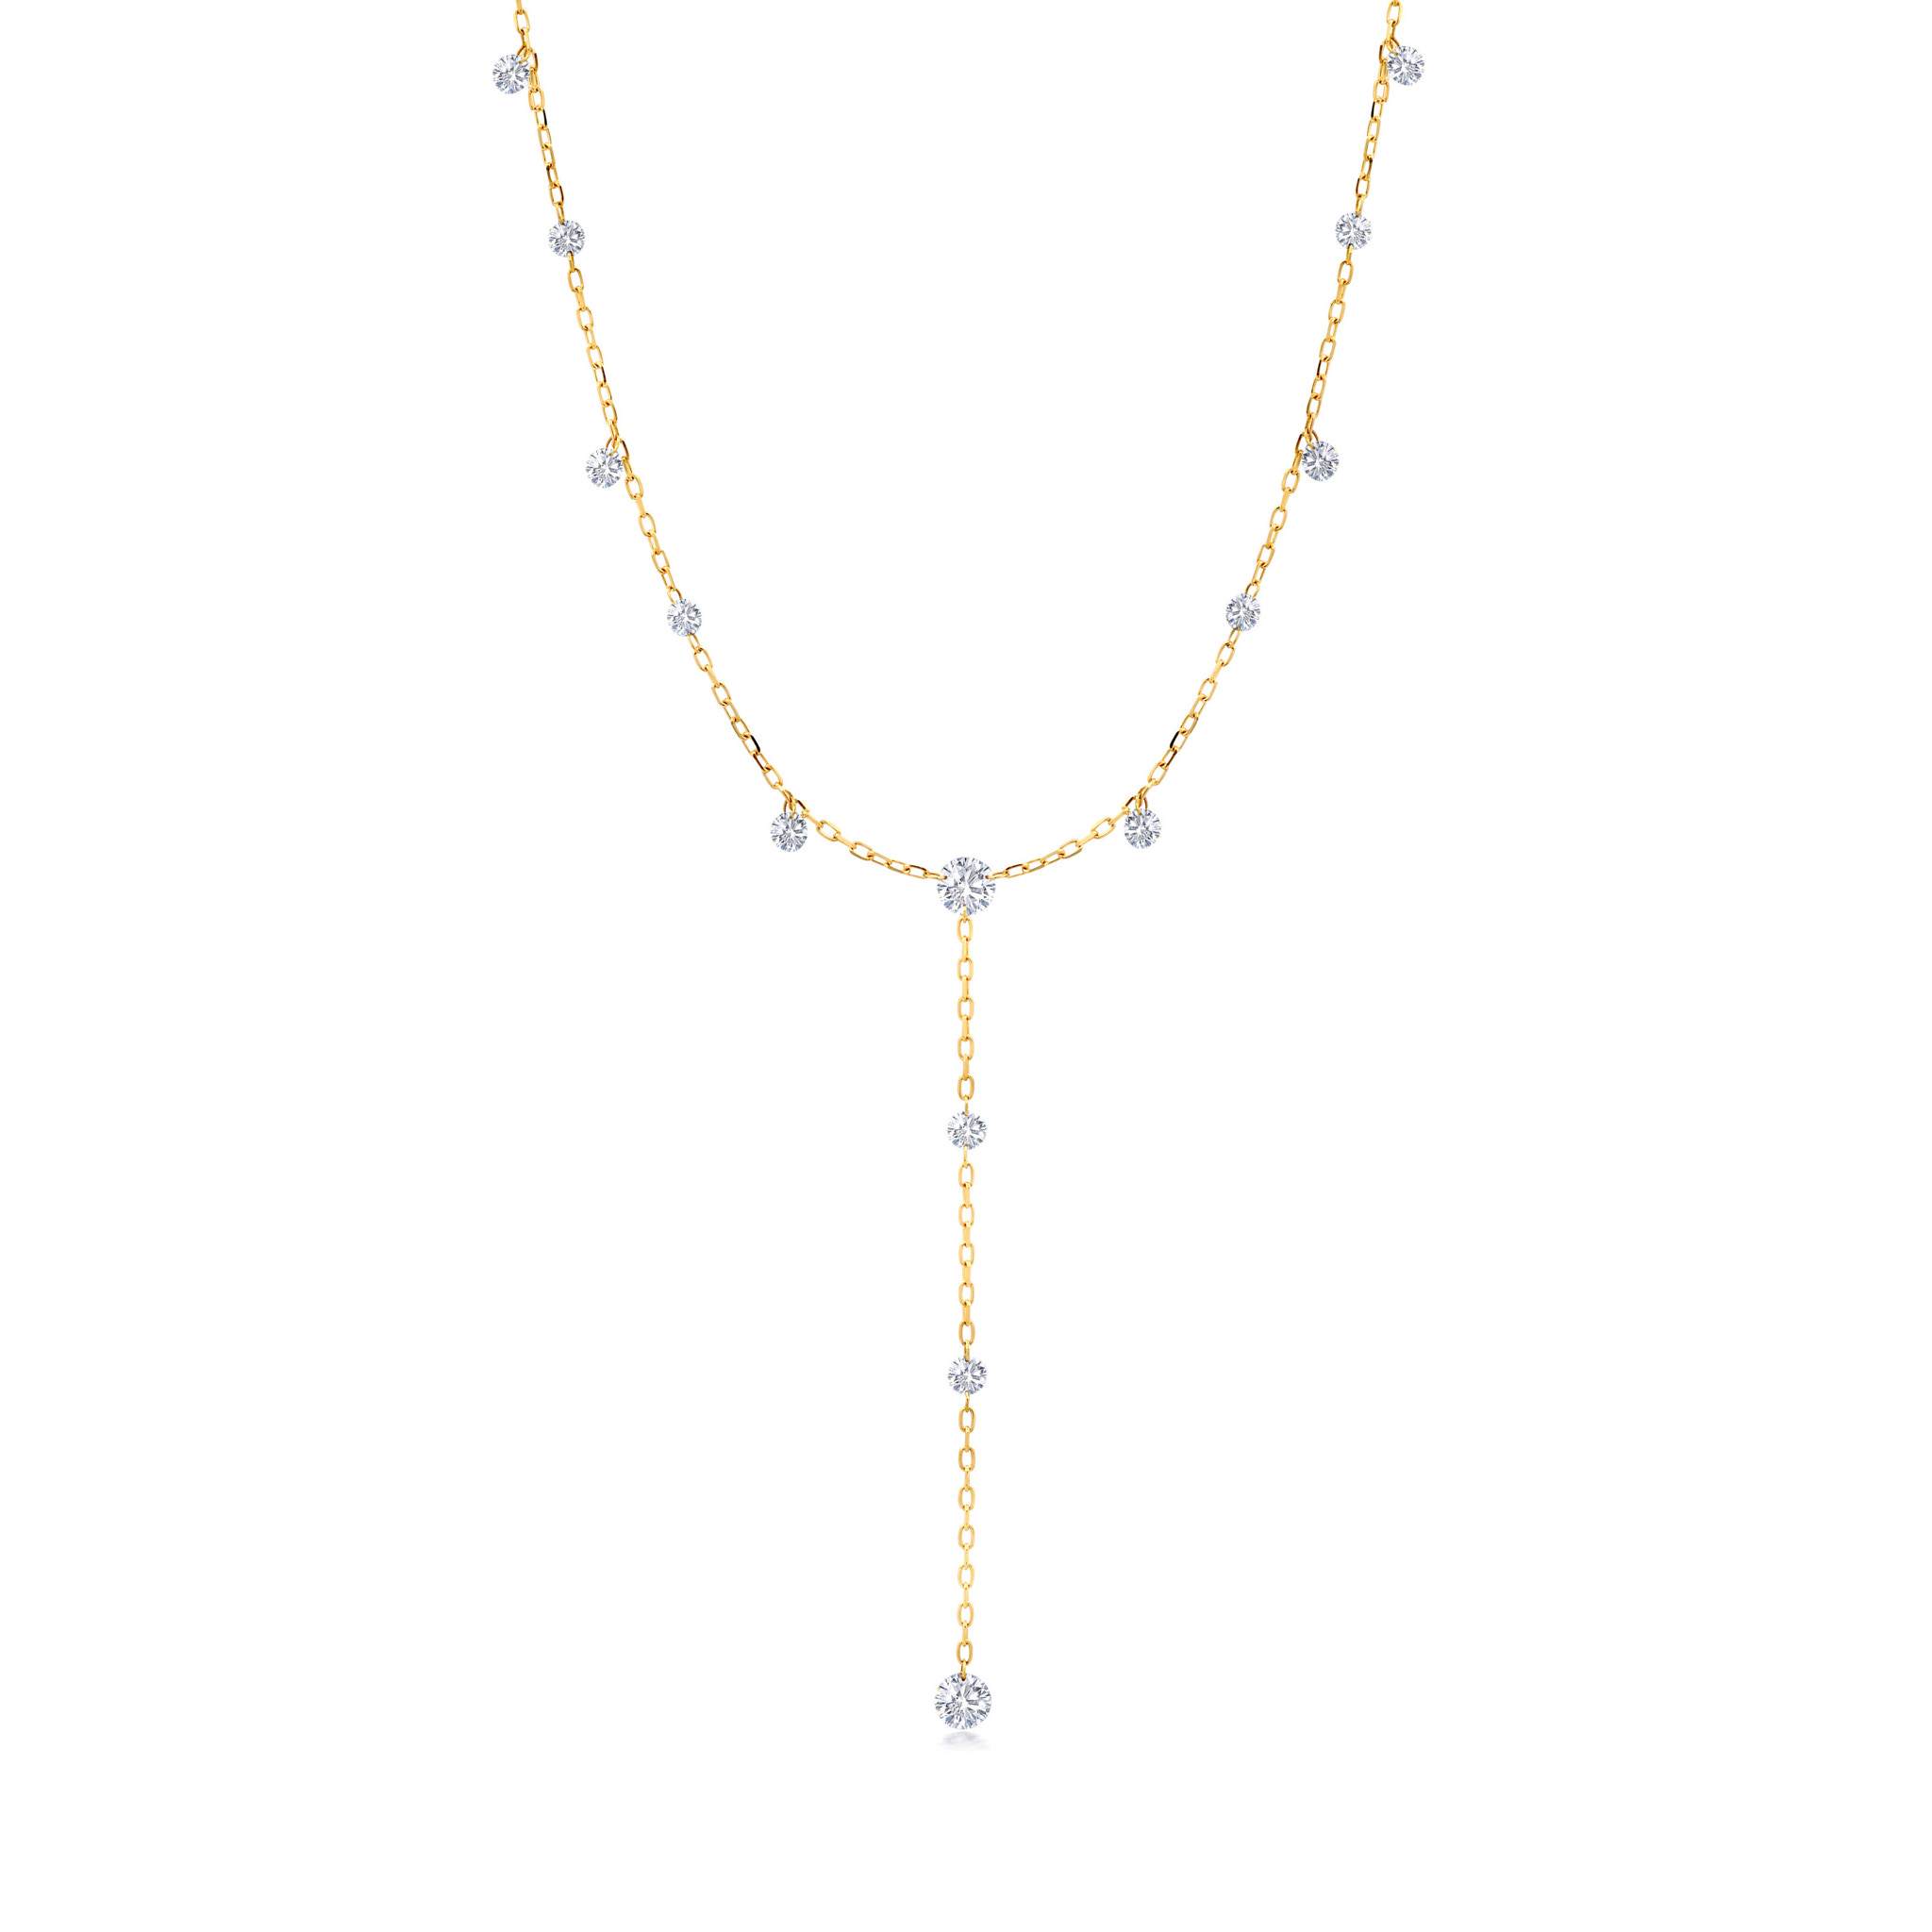 Graziela Gems - Necklace - 1 Ct Floating Diamond Y-Necklace - Yellow Gold